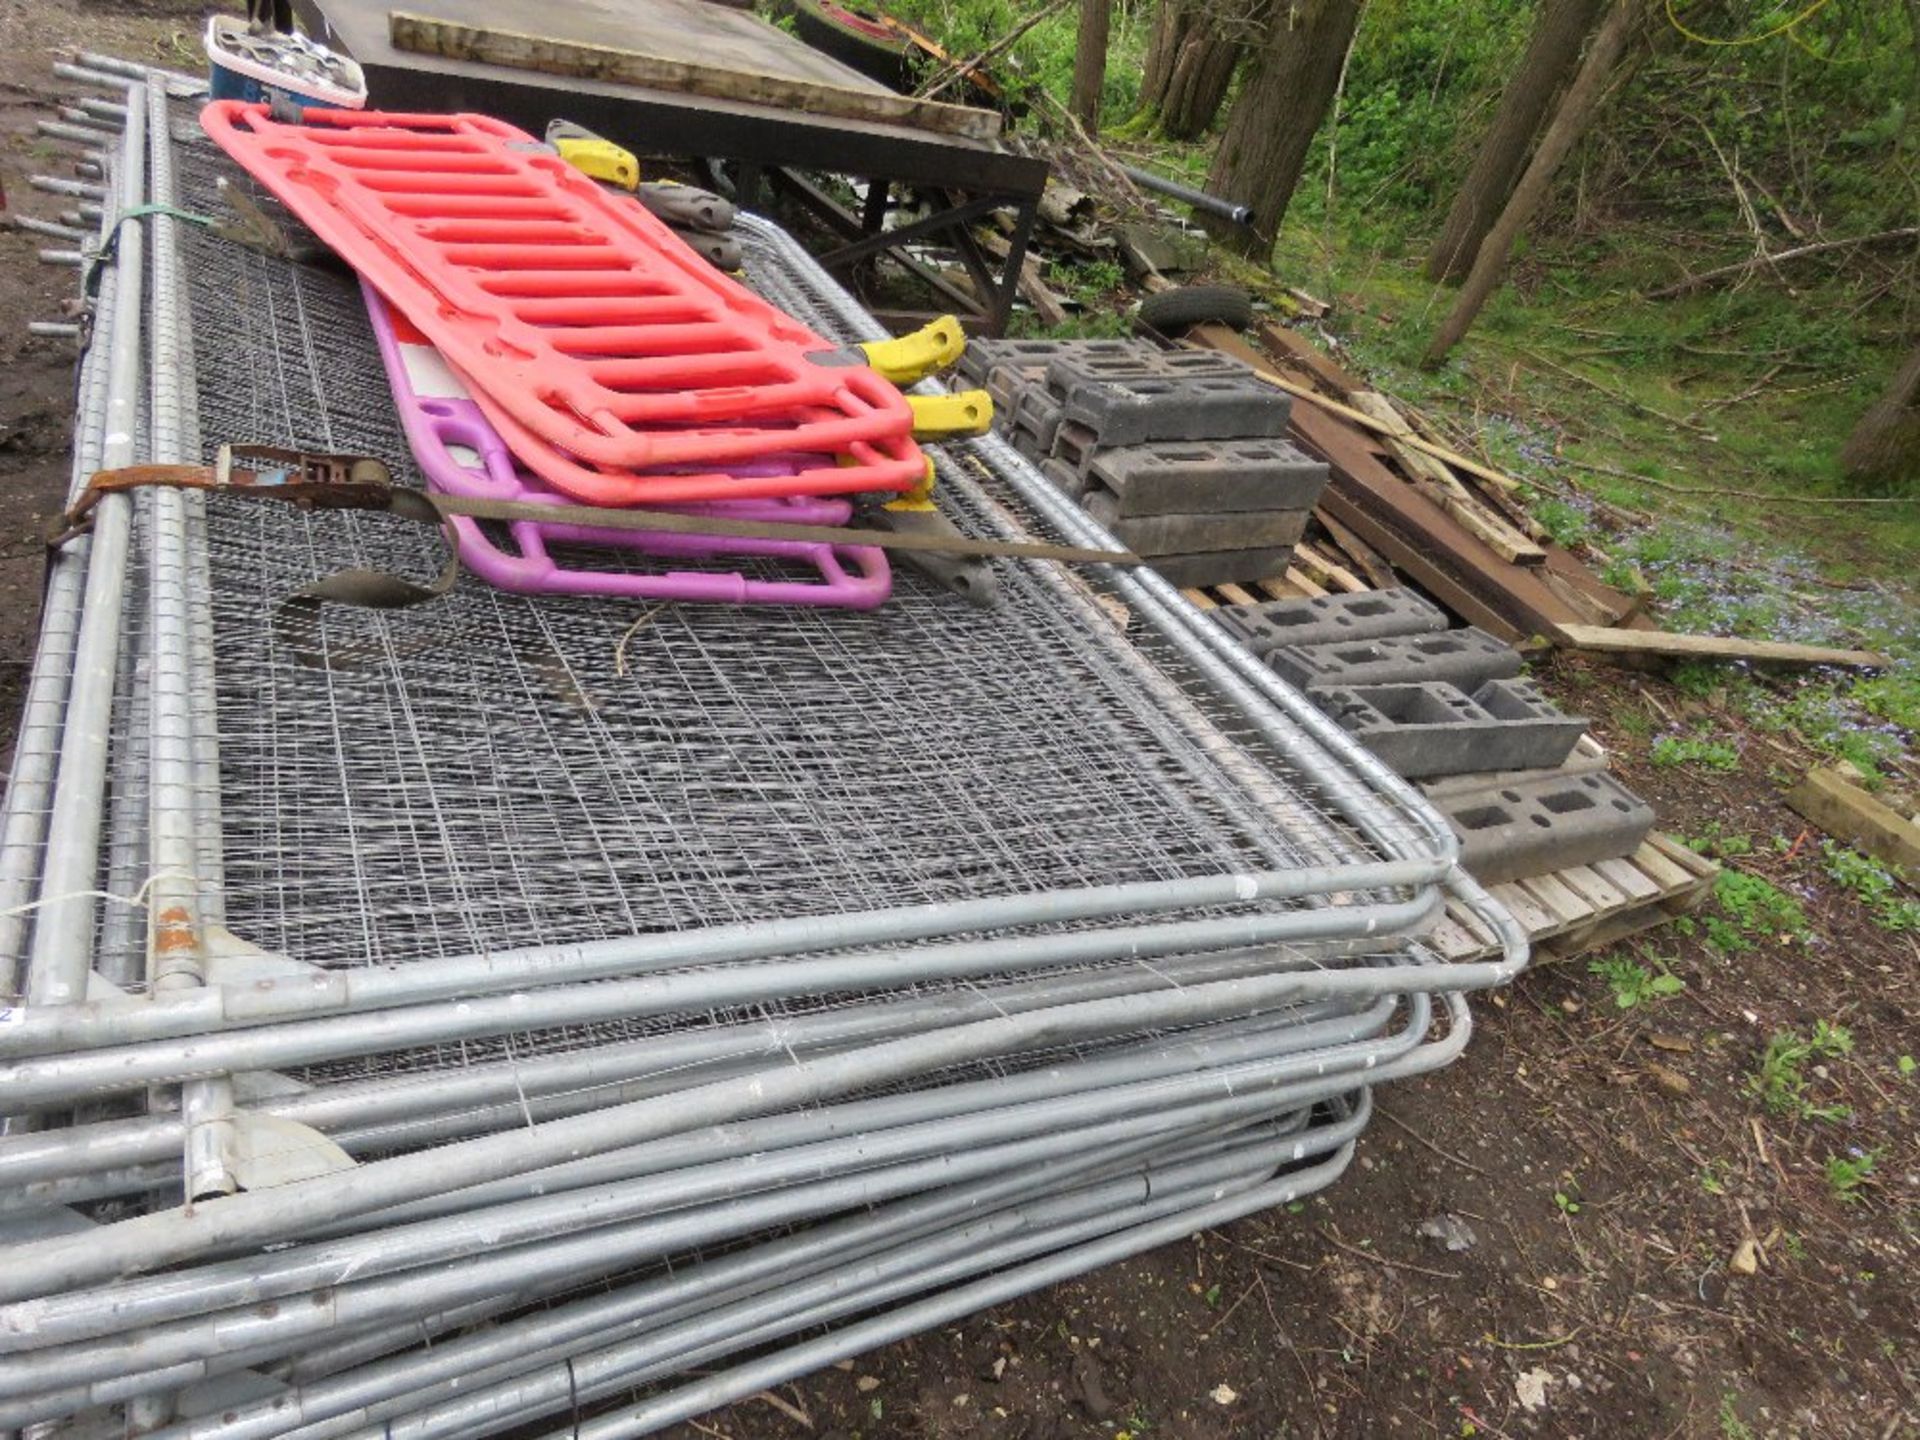 STACK OF HERAS TYPE FENCE PANELS (21NO IN TOTAL APPROX) WITH FEET AND CLIPS AS SHOWN PLUS 4 NO PLAST